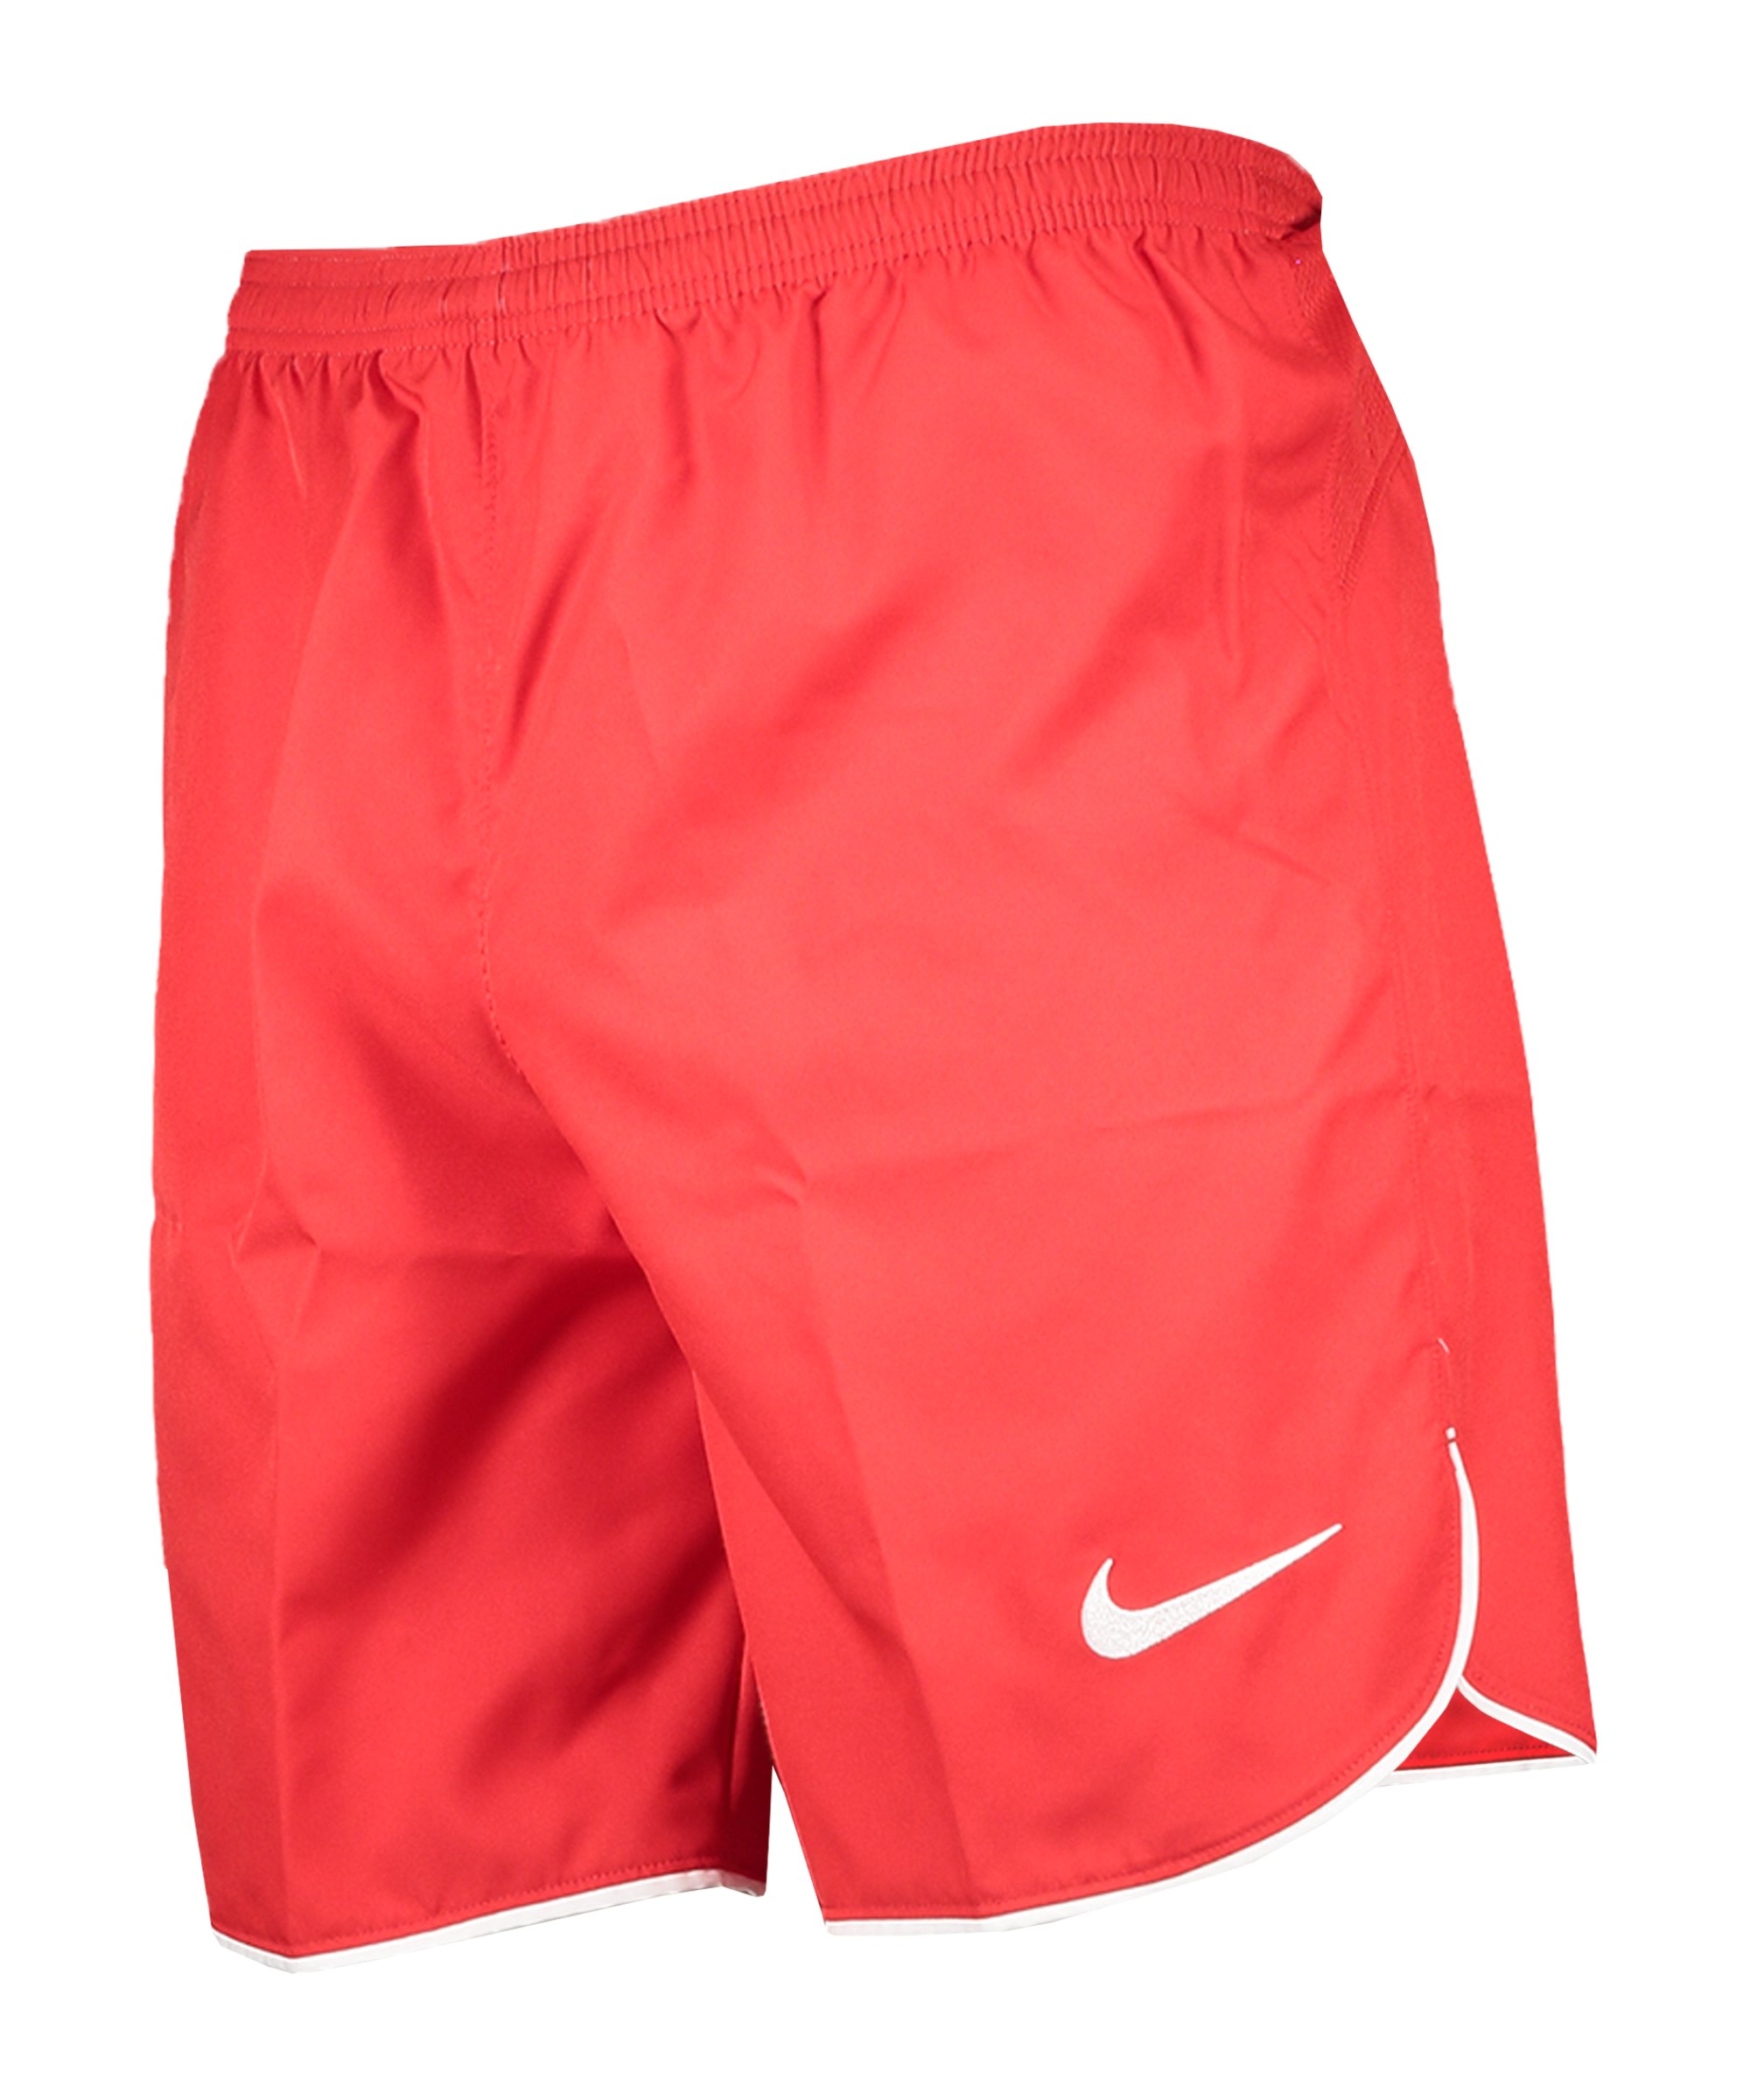 Nike Laser V Woven Short Rot Weiss F657 - rot